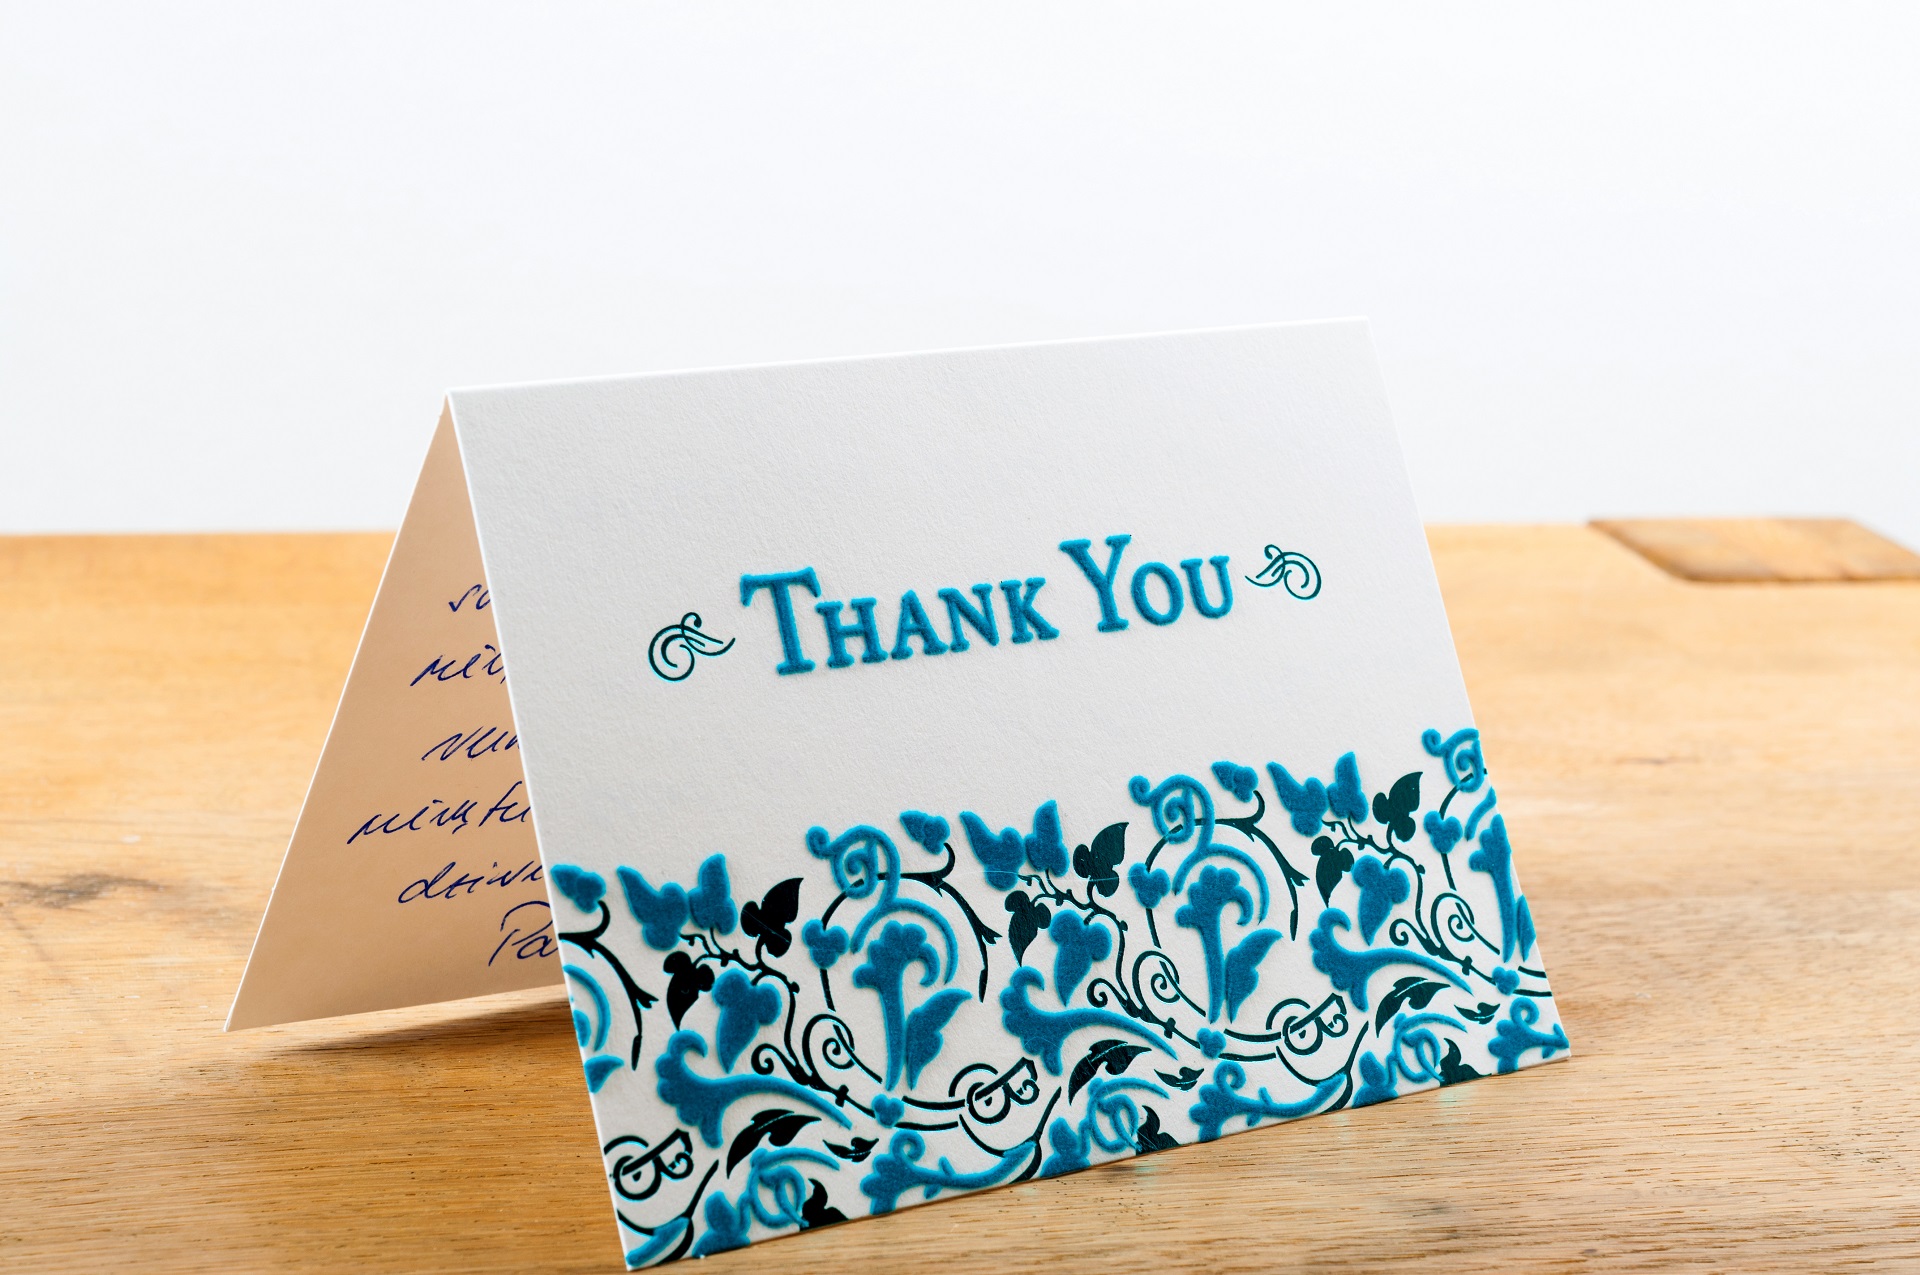 Add a thank-you note